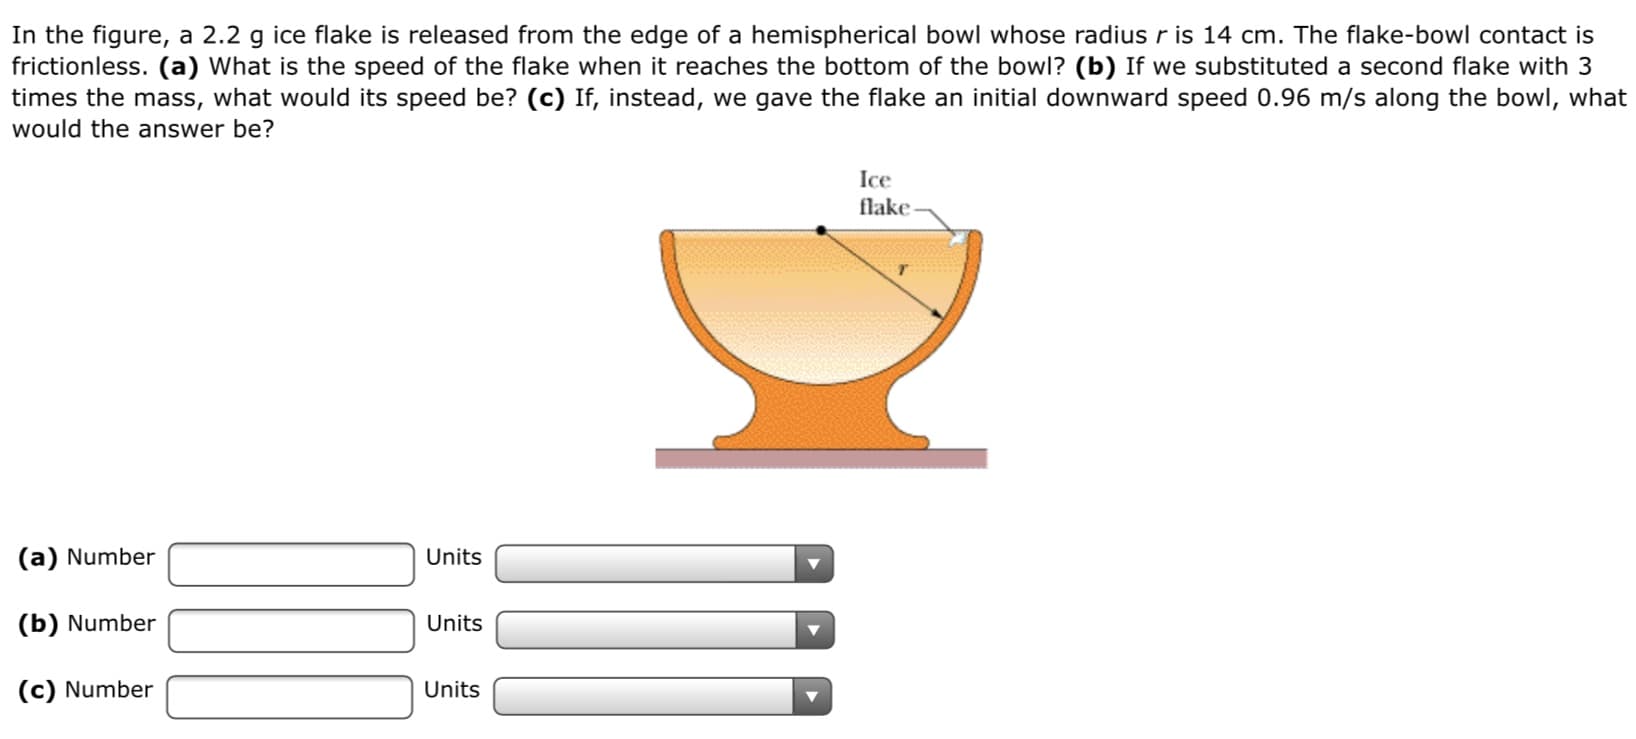 In the figure, a 2.2 g ice flake is released from the edge of a hemispherical bowl whose radius r is 14 cm. The flake-bowl contact is
frictionless. (a) What is the speed of the flake when it reaches the bottom of the bowl? (b) If we substituted a second flake with 3
times the mass, what would its speed be? (c) If, instead, we gave the flake an initial downward speed 0.96 m/s along the bowl, what
would the answer be?
Ice
flake
(a) Number
Units
(b) Number
Units
(c) Number
Units
